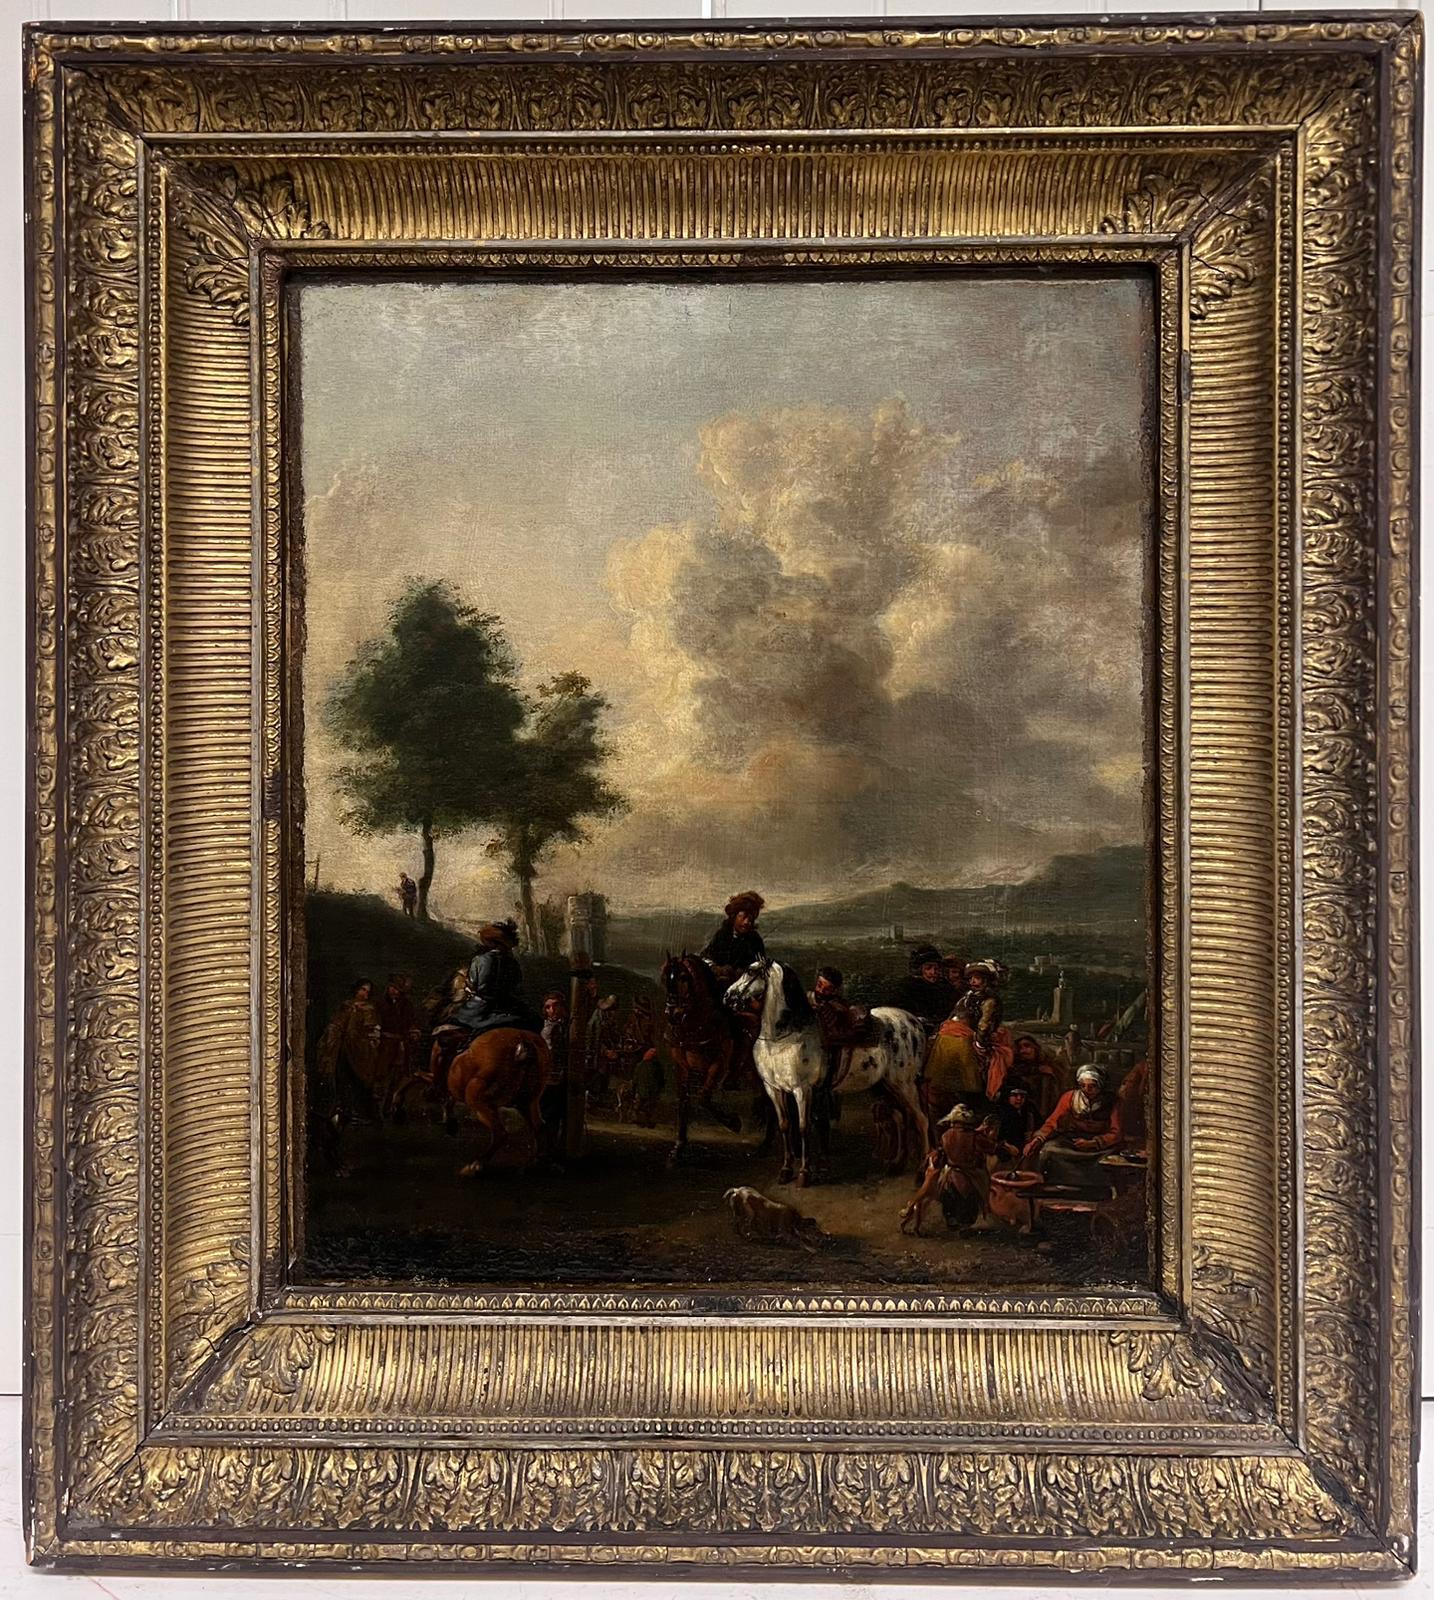 Philips Wouwerman Landscape Painting - Fine 17th Century Dutch Old Master Oil Military Encampment Figures on Horseback